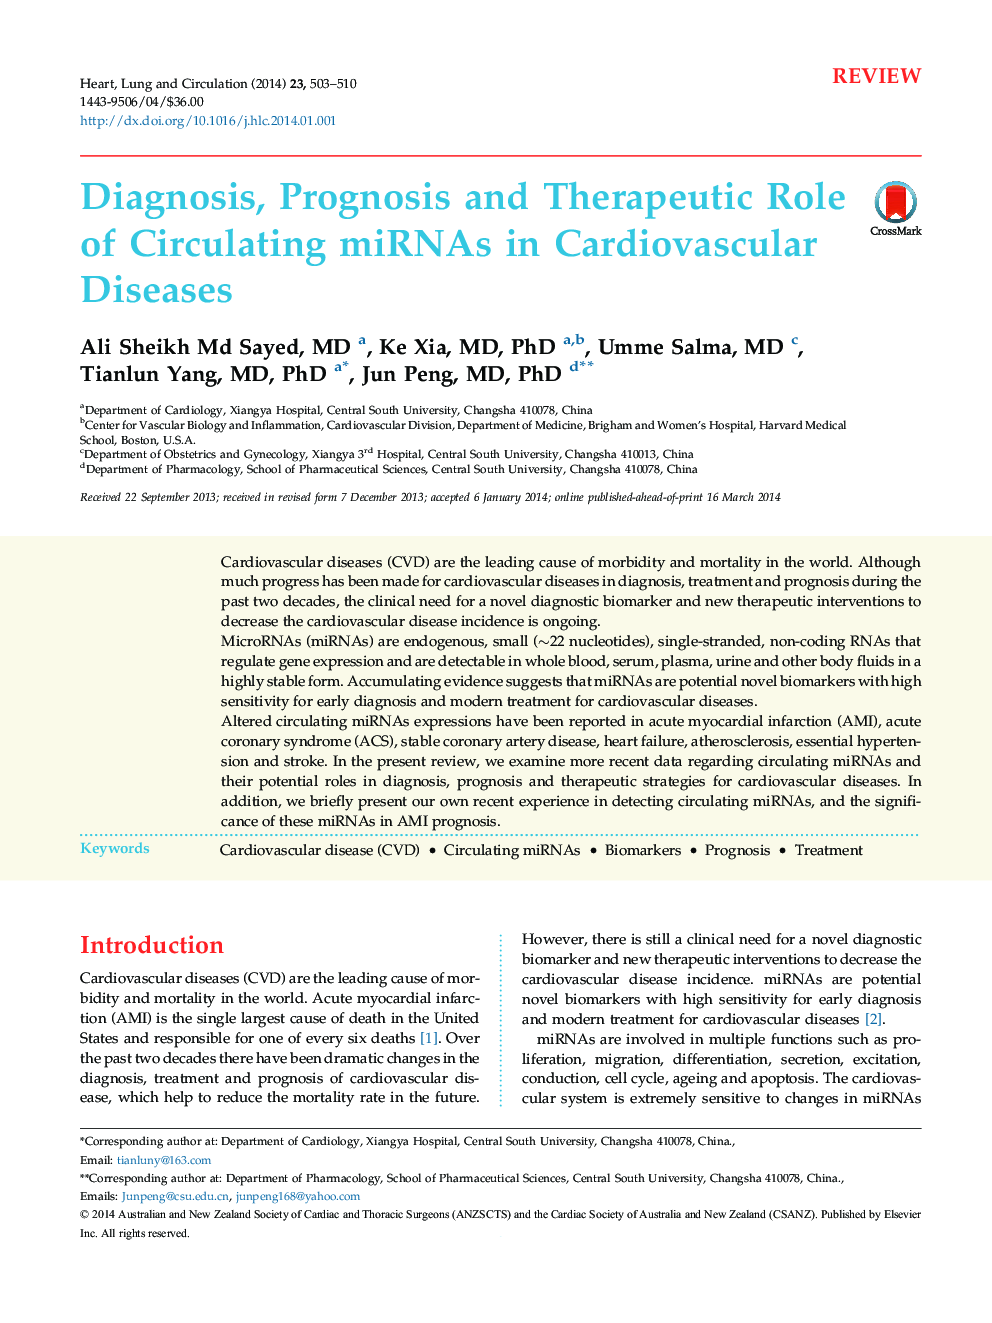 Diagnosis, Prognosis and Therapeutic Role of Circulating miRNAs in Cardiovascular Diseases